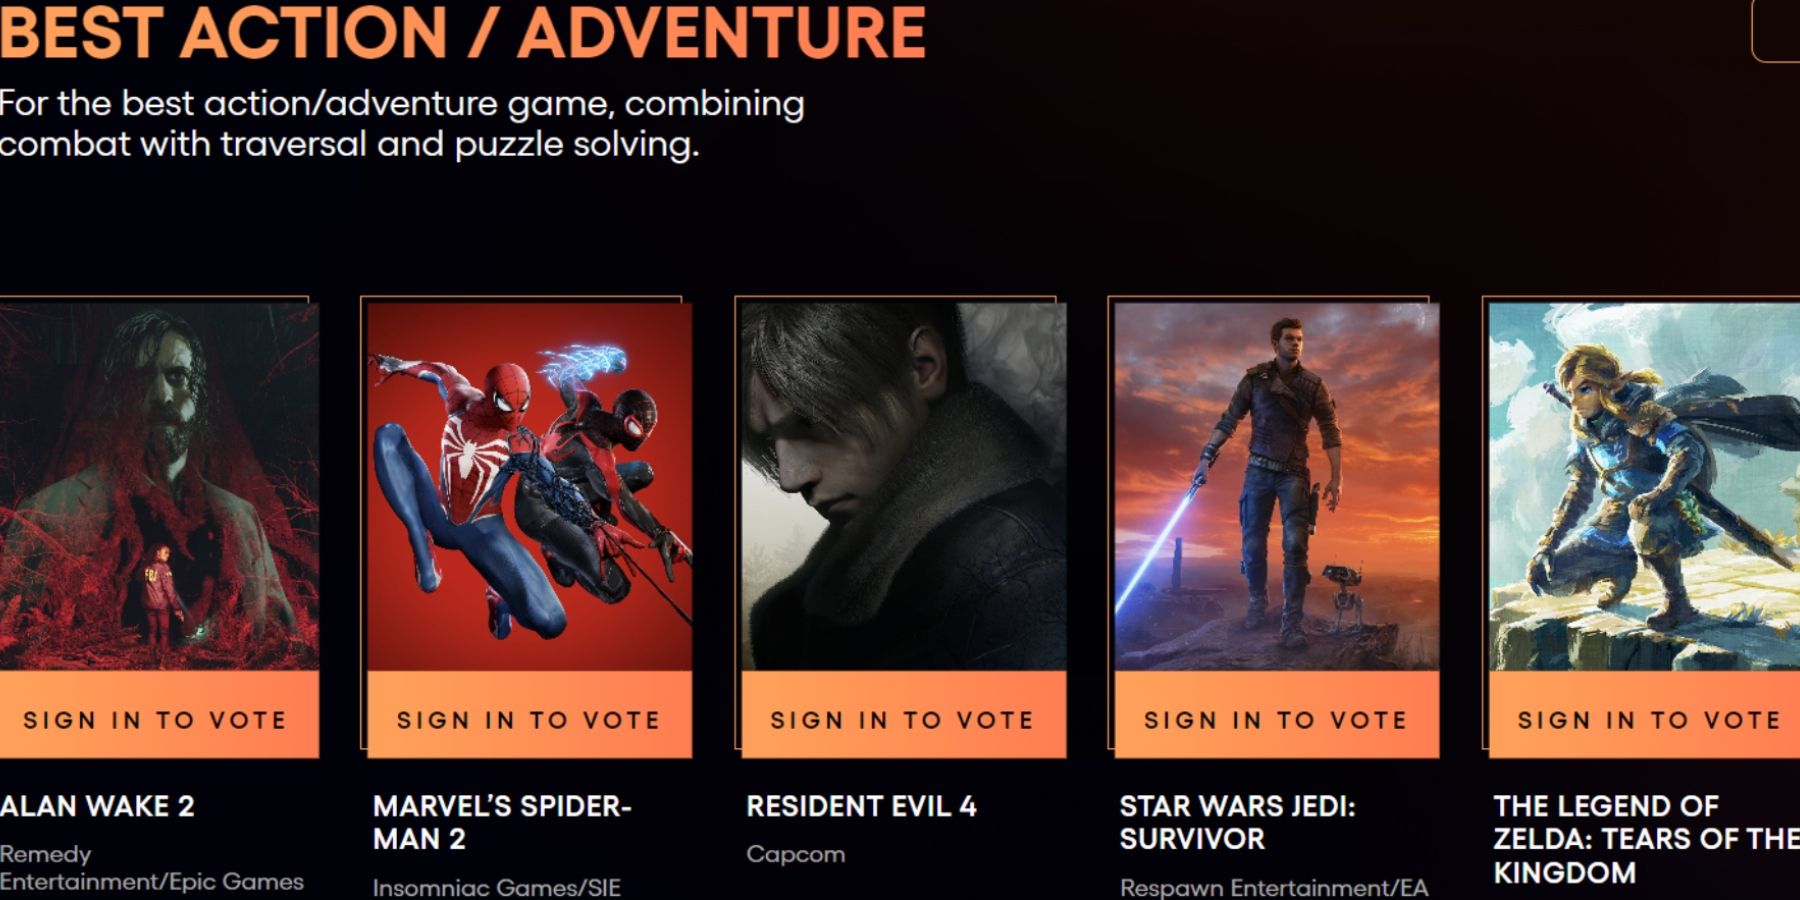 The Game Awards 2021: Best Action/Adventure Game Winner